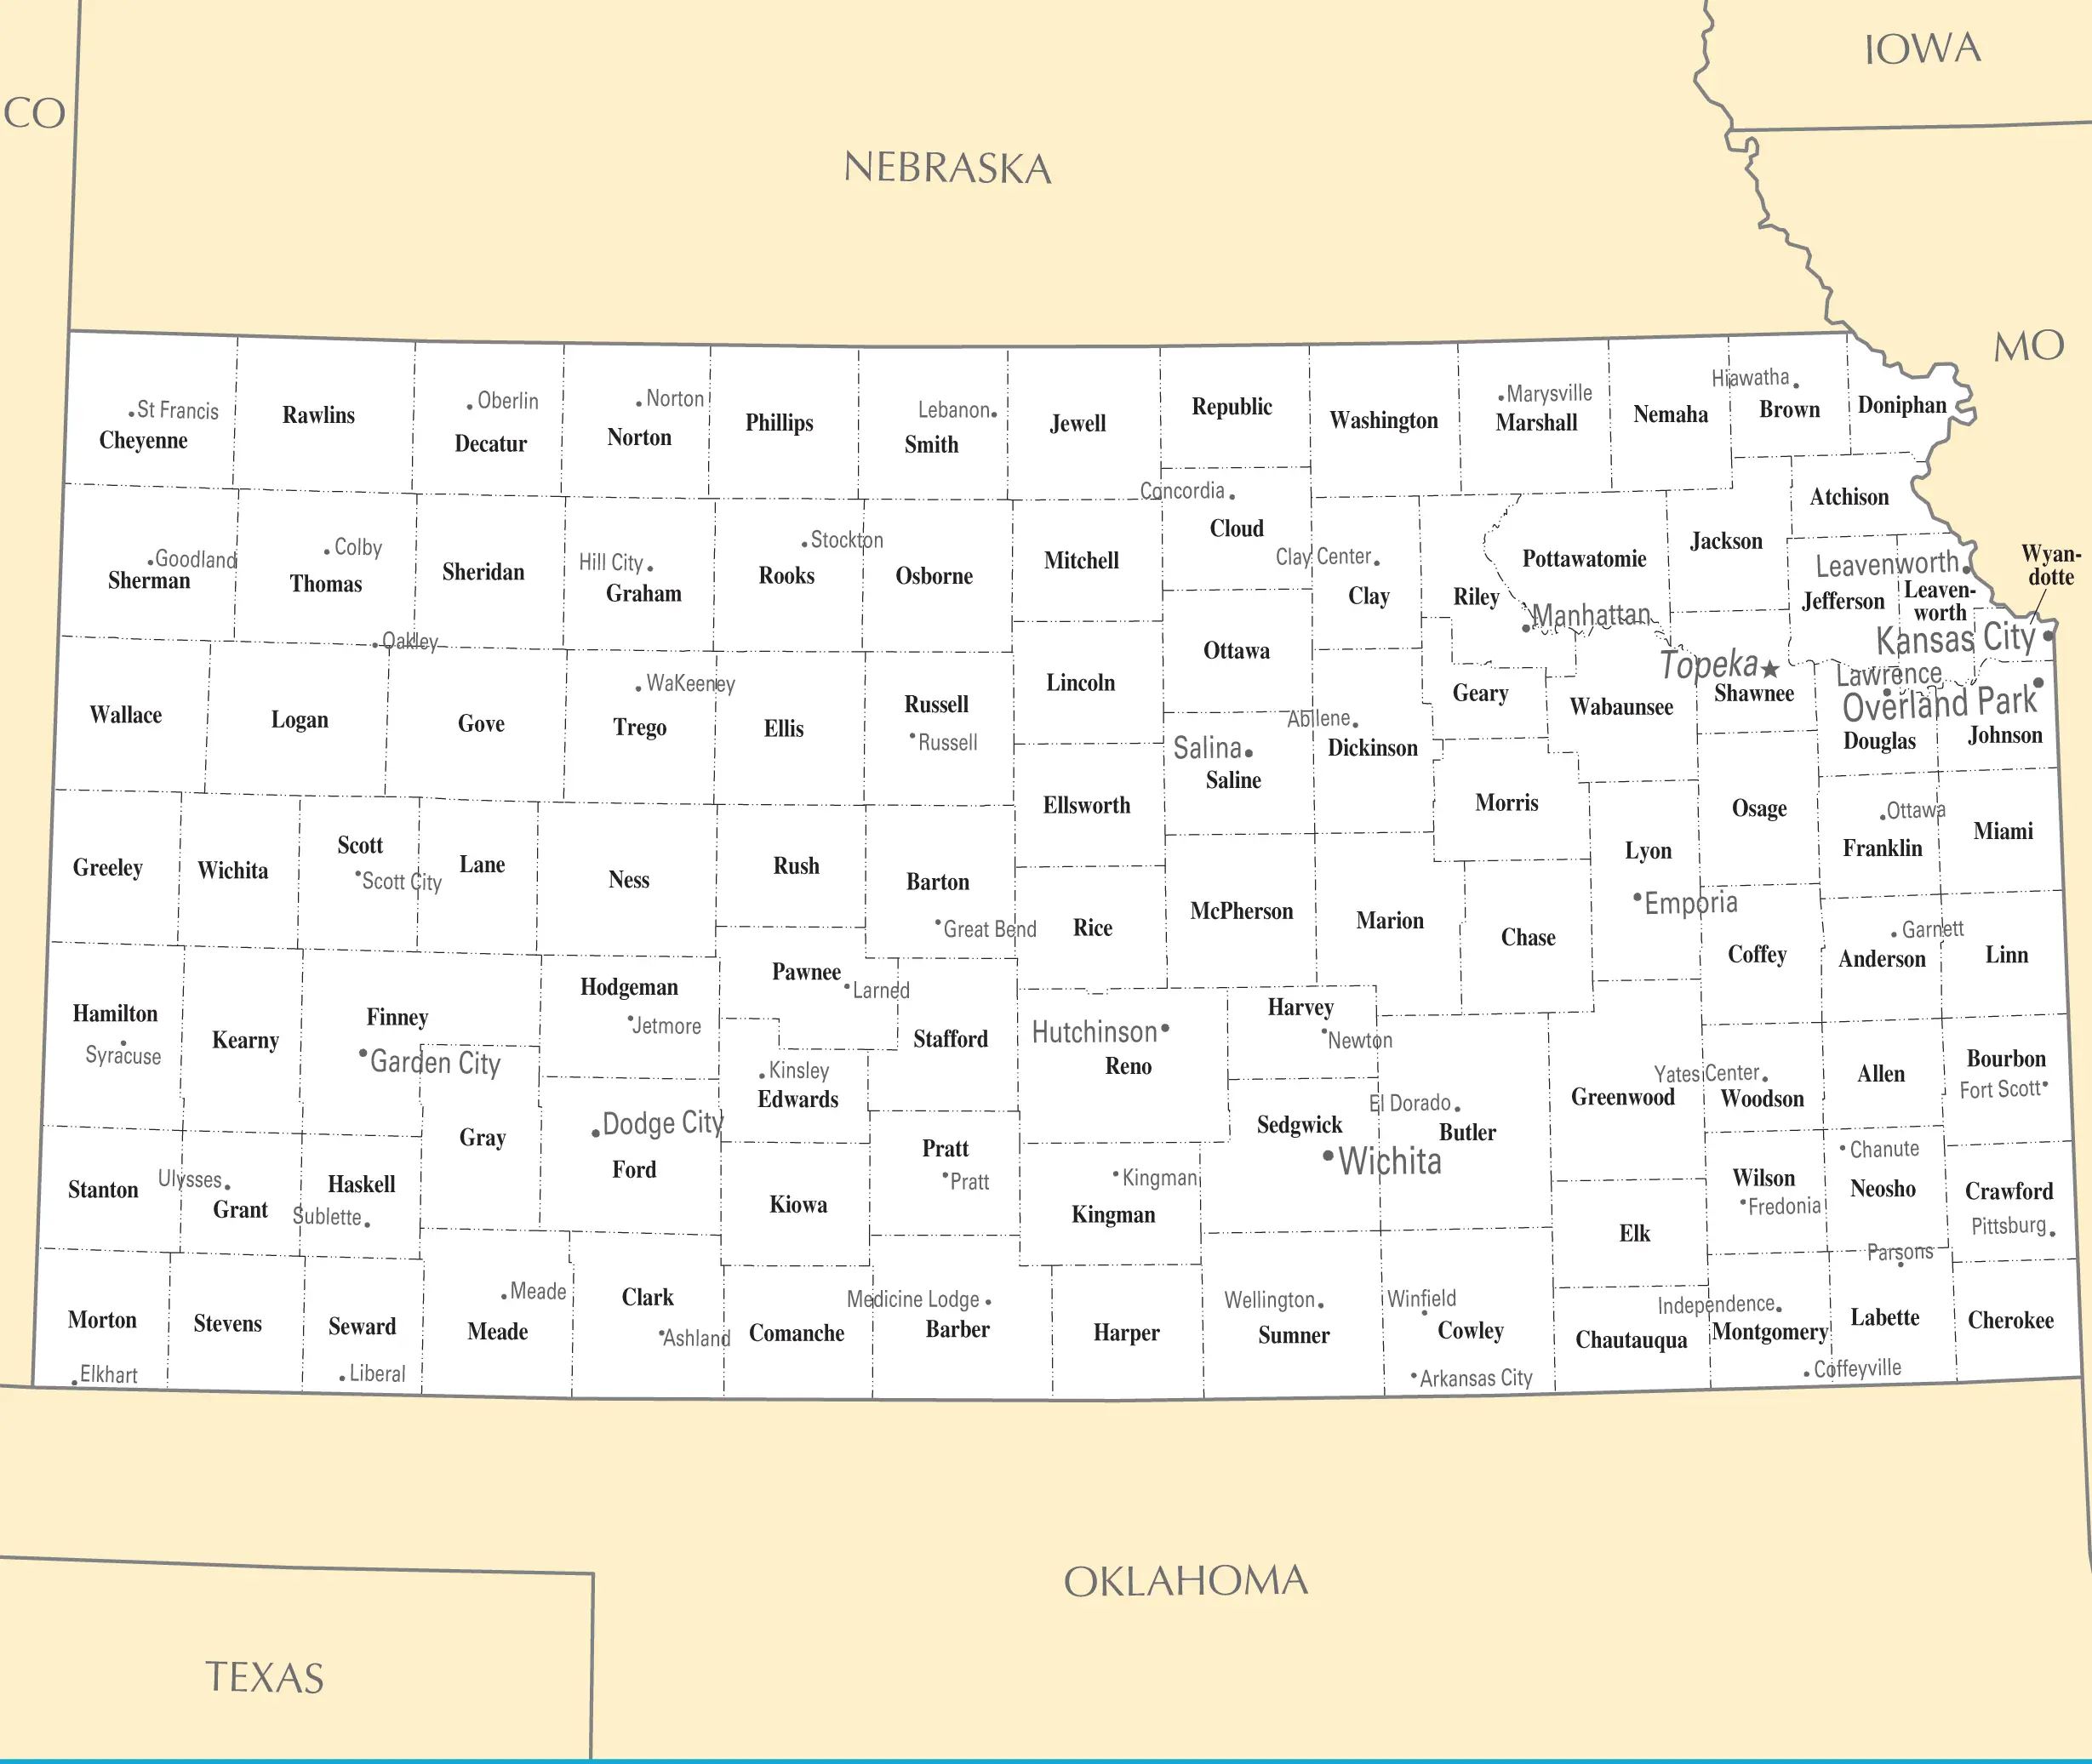 Kansas Map With Cities And Towns